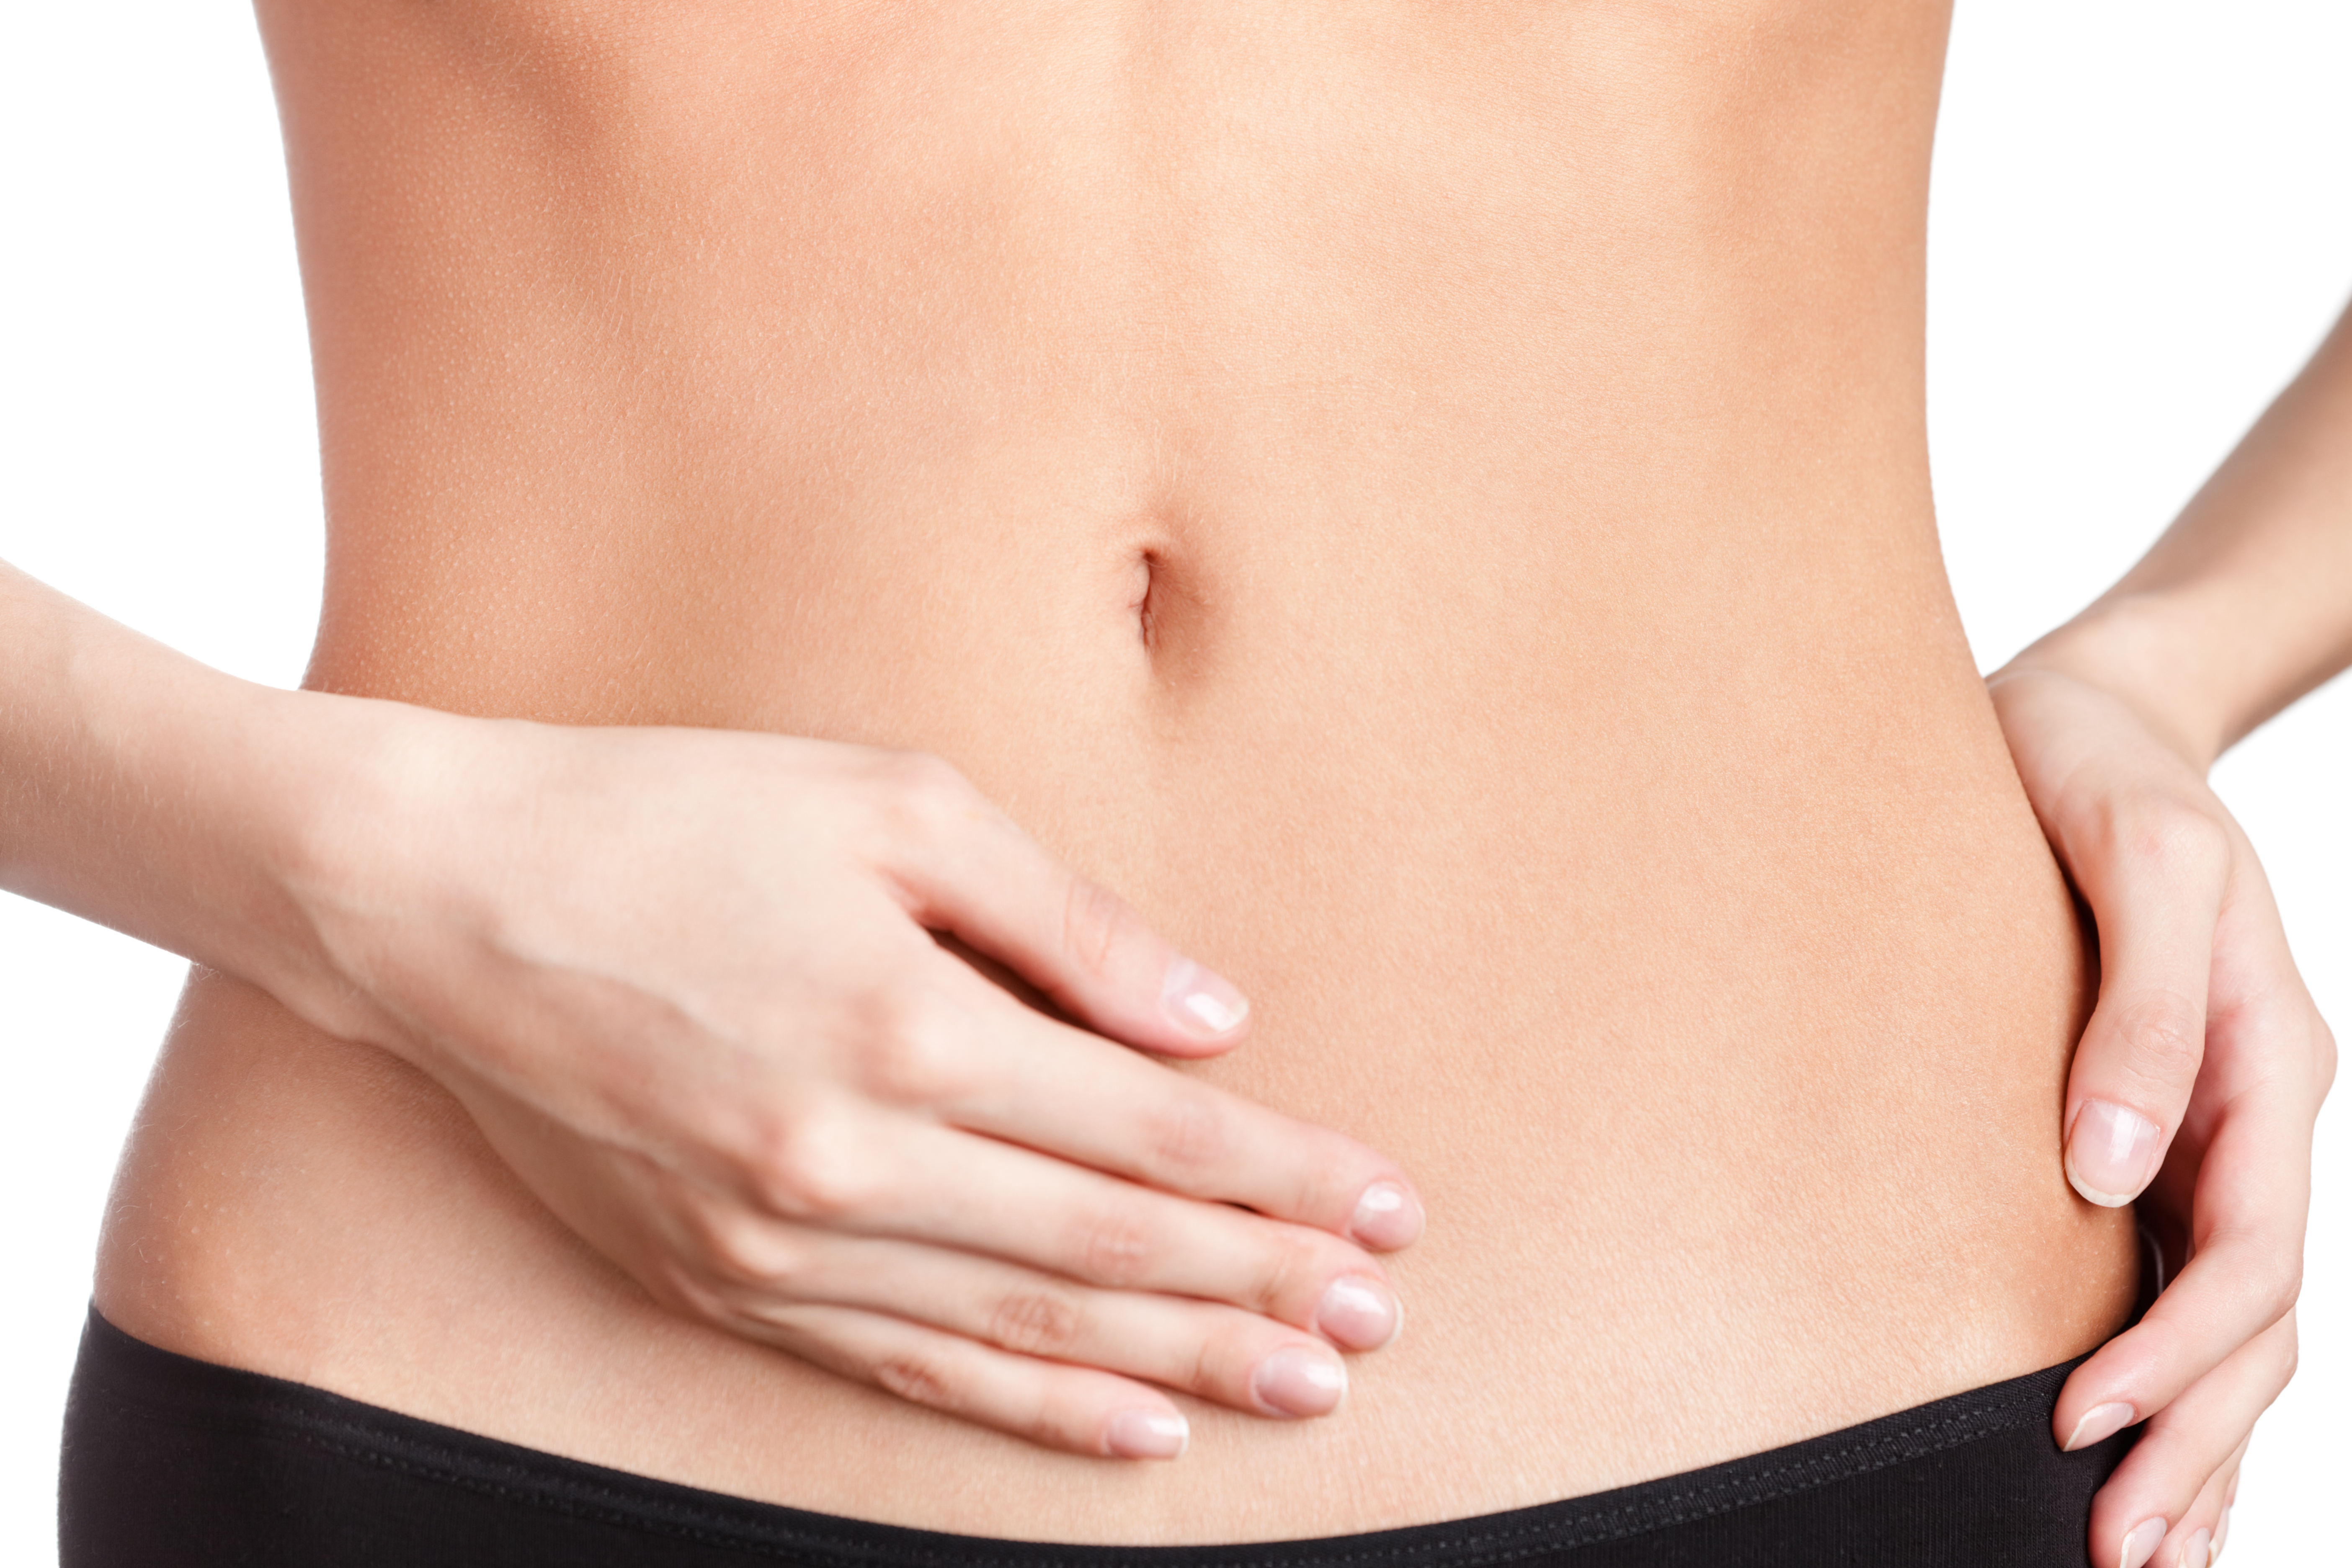 4 Types of Tummy Tucks: What Are the Differences?